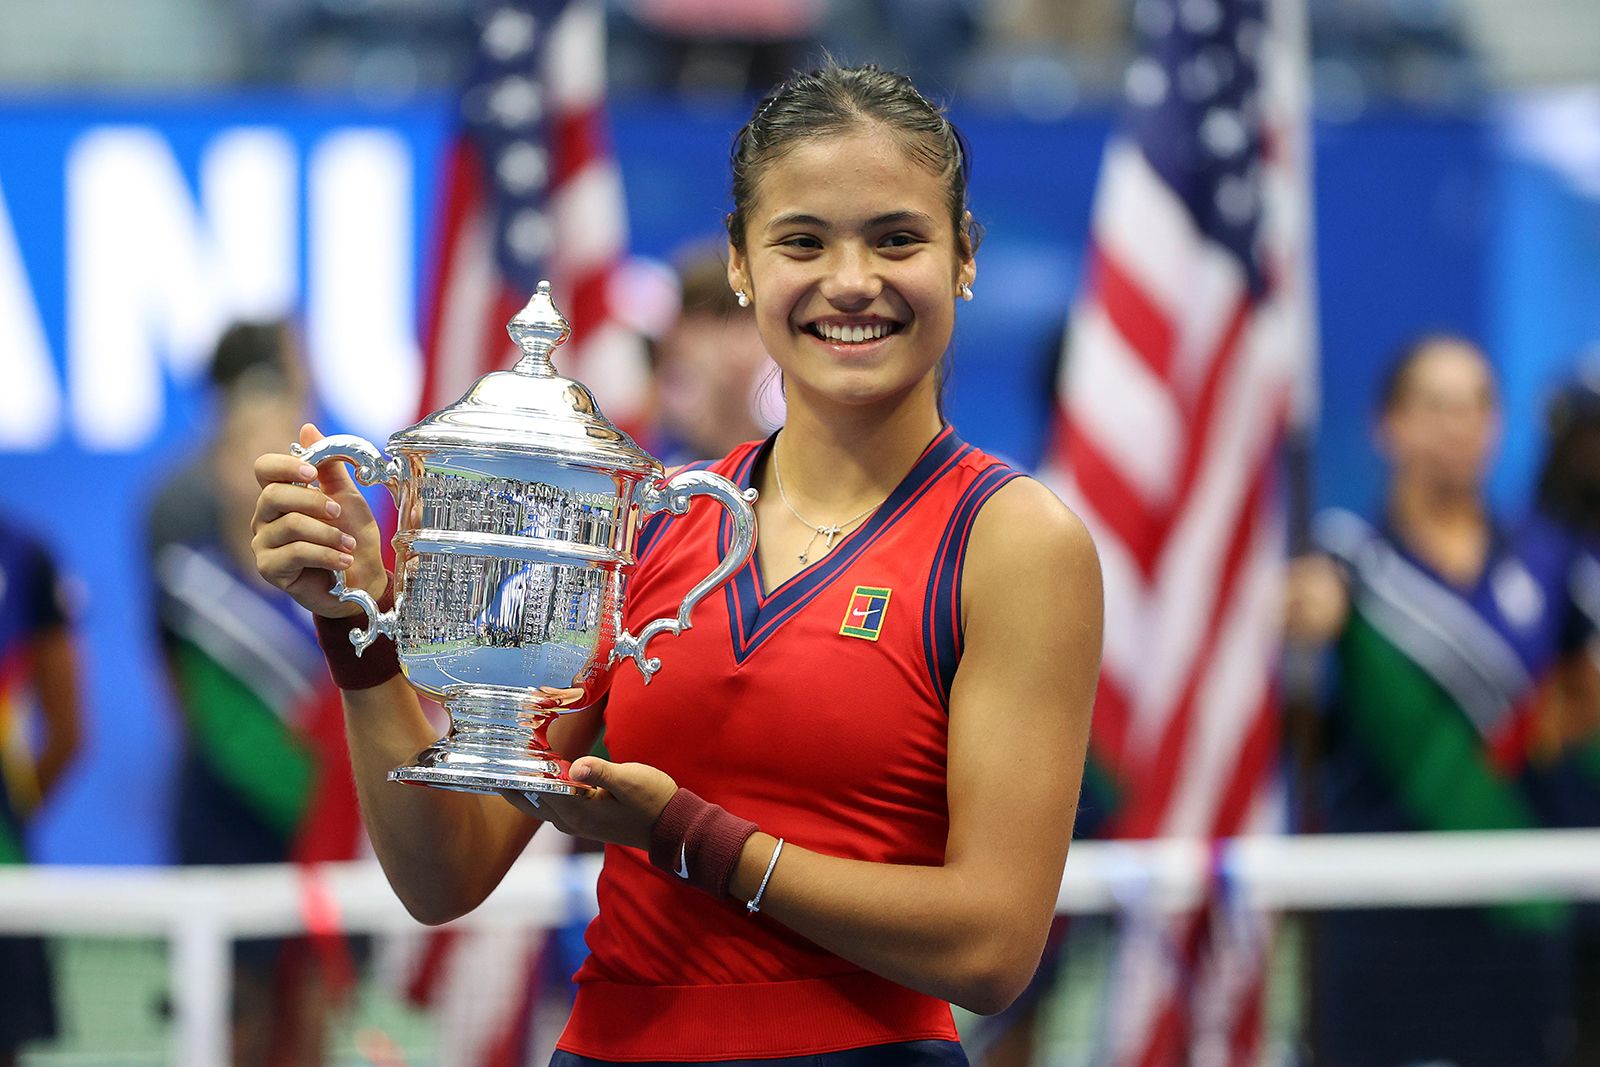 Emma Radacanu in Tiffany & Co. jewellery just after winning the US Open in September 2021 